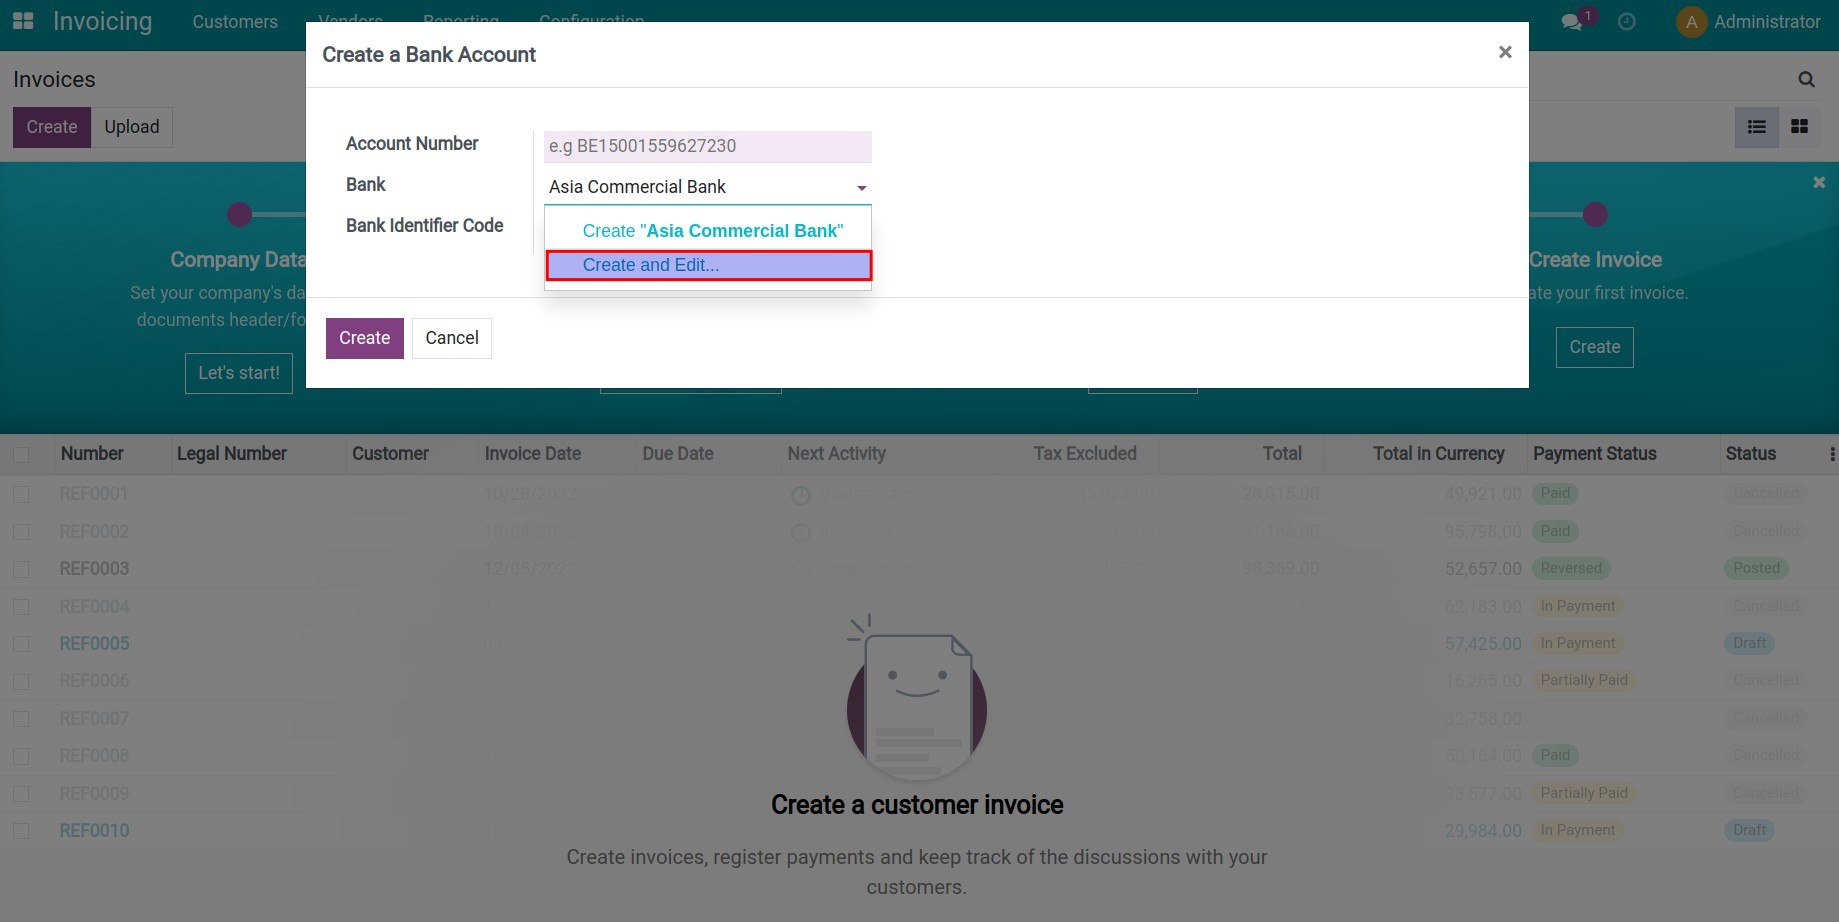 Create a new bank account from Invoicing app